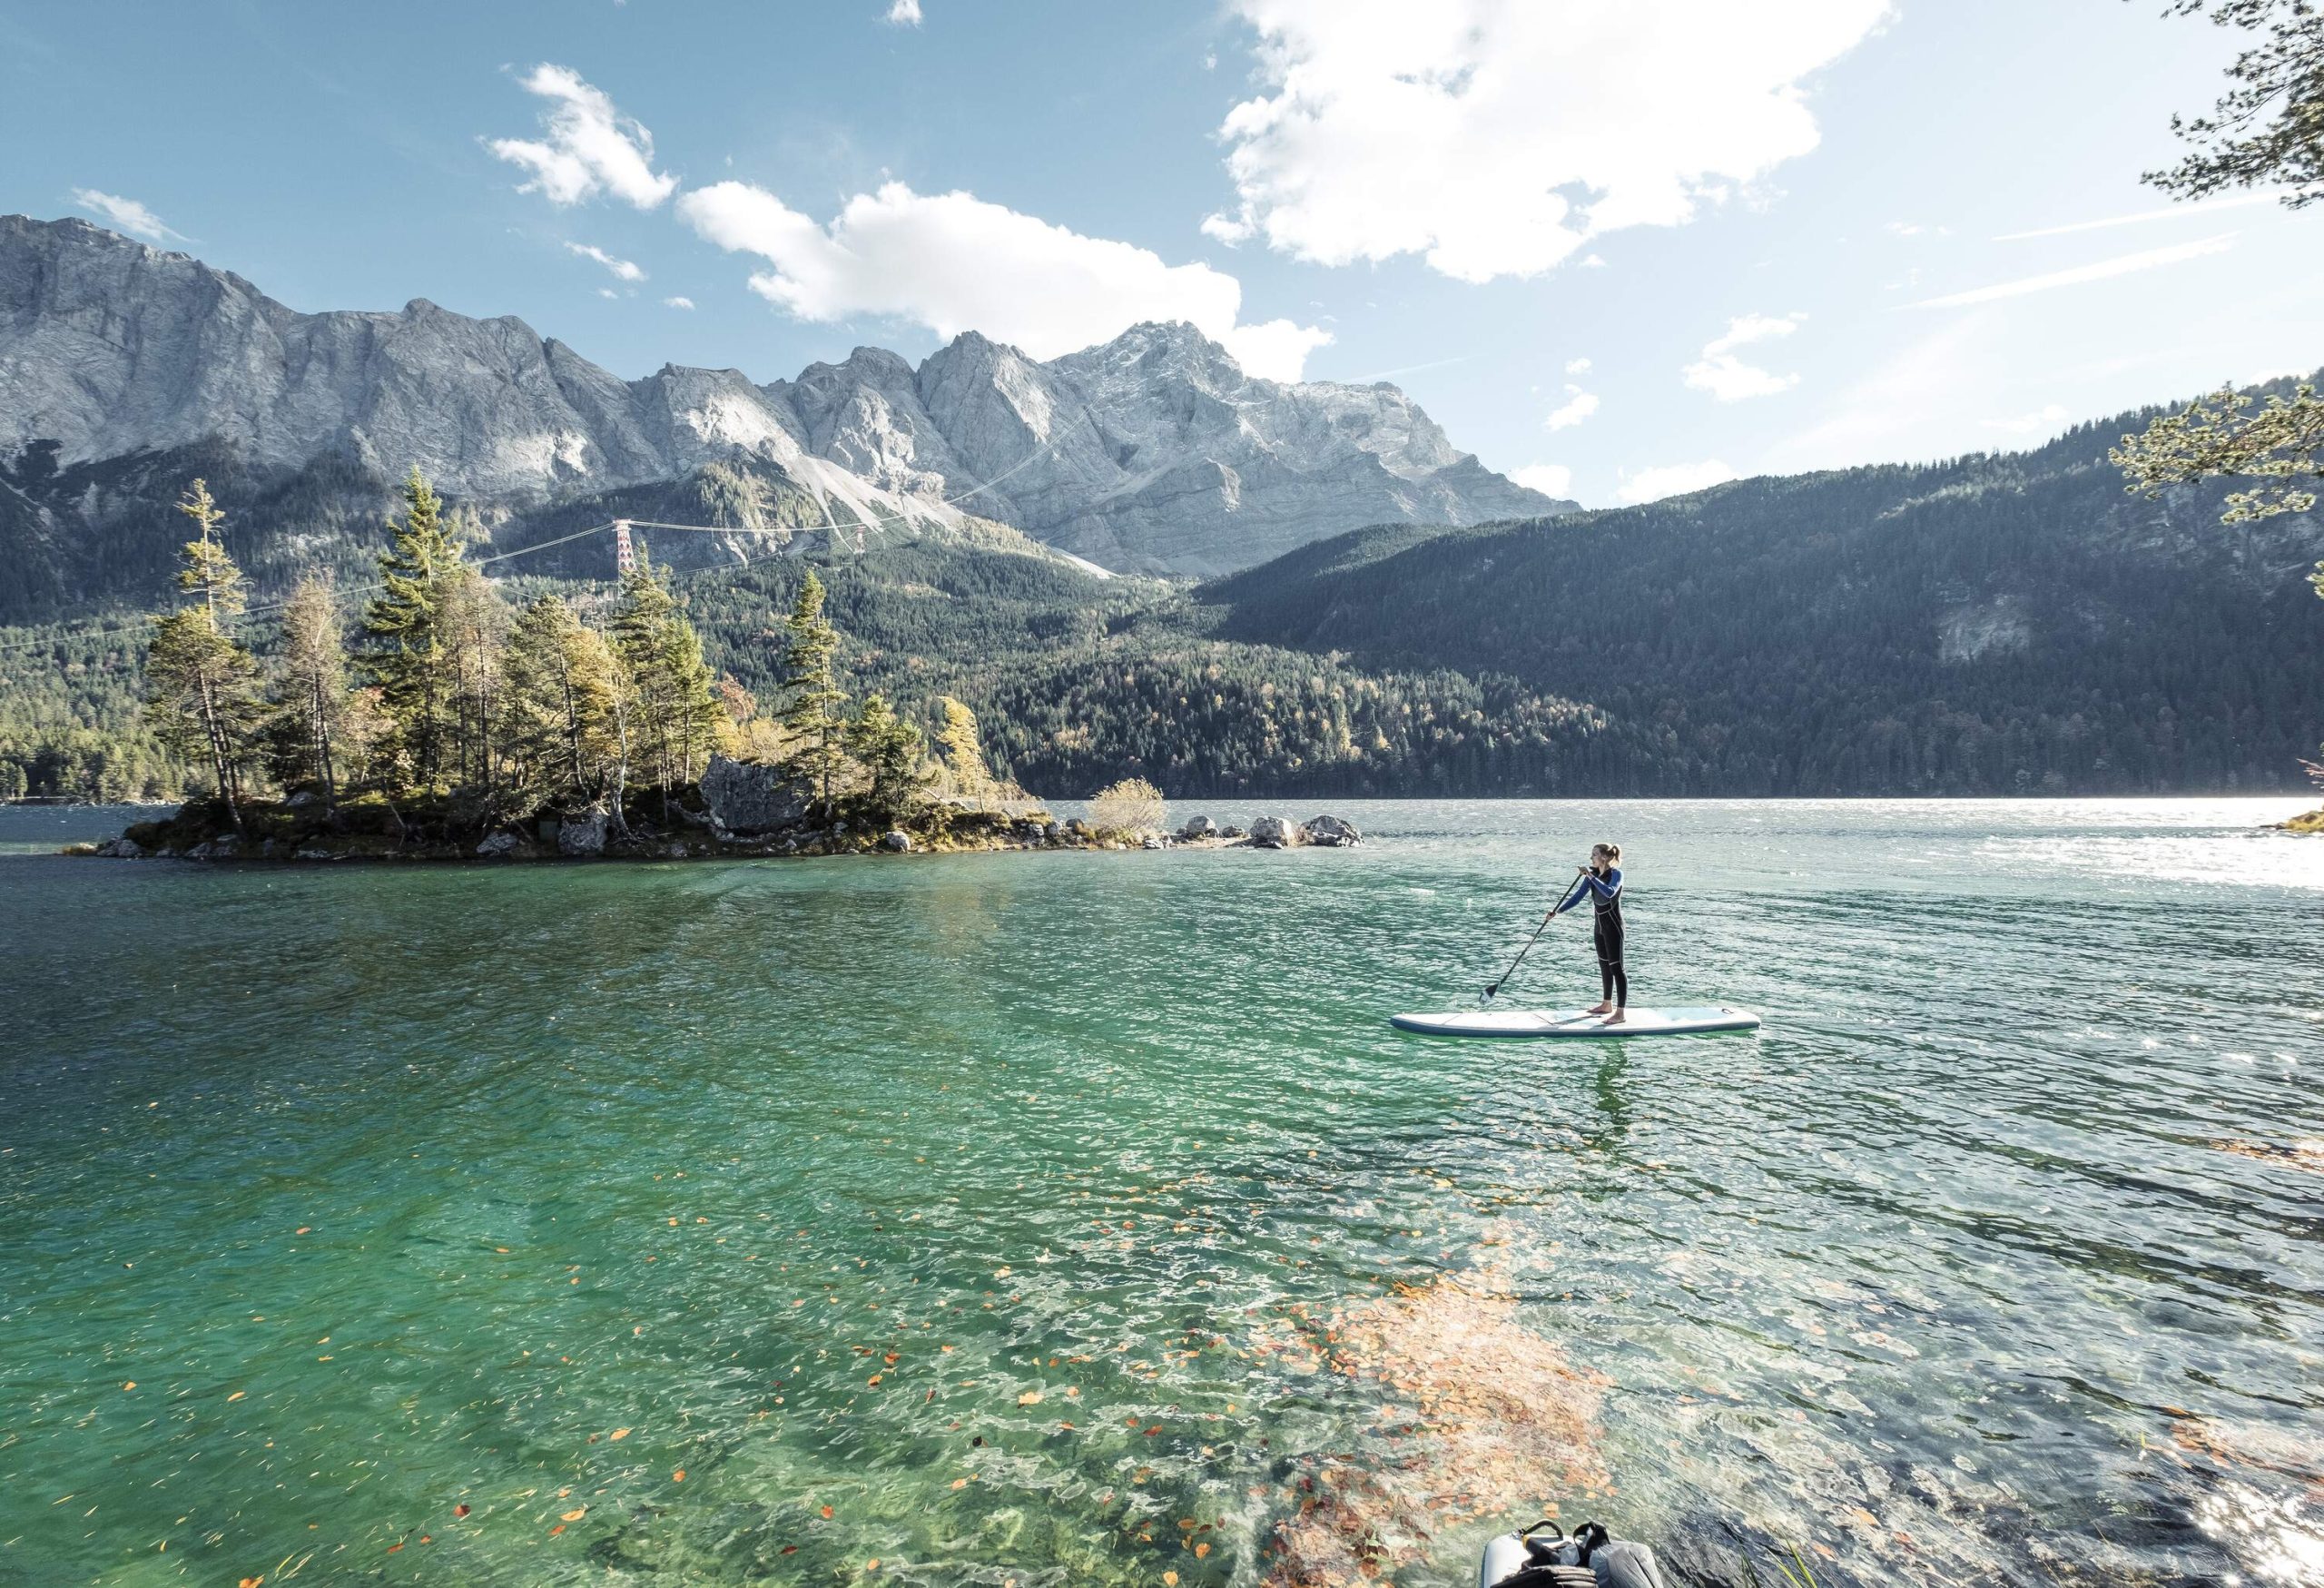 dest_germany_bavaria_garmisch_eibsee-lake_theme_sup_paddleboarding_gettyimages-1308858280_universal_within-usage-period_85127